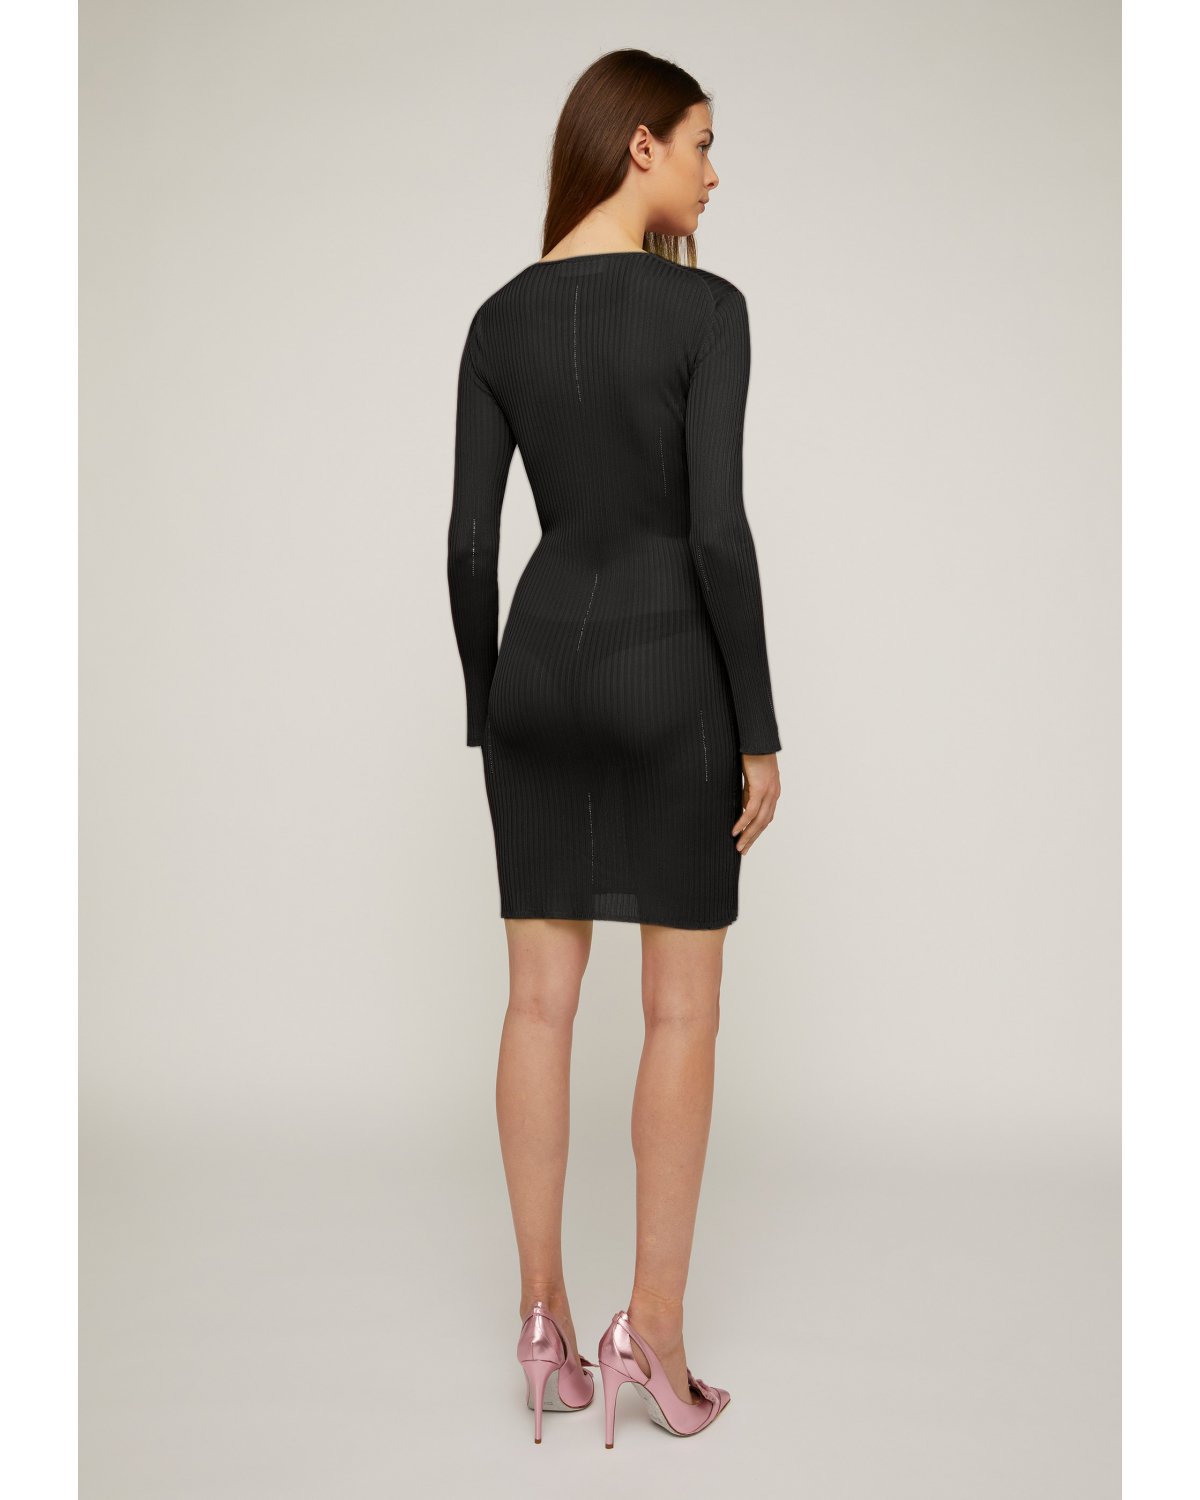 Kinit dress | Spring Summer 2023 Collection, 73_74, Cruise 2023 Collection, Sale, Evening Essential, Summer Sale, Mid season sale -40% | Genny